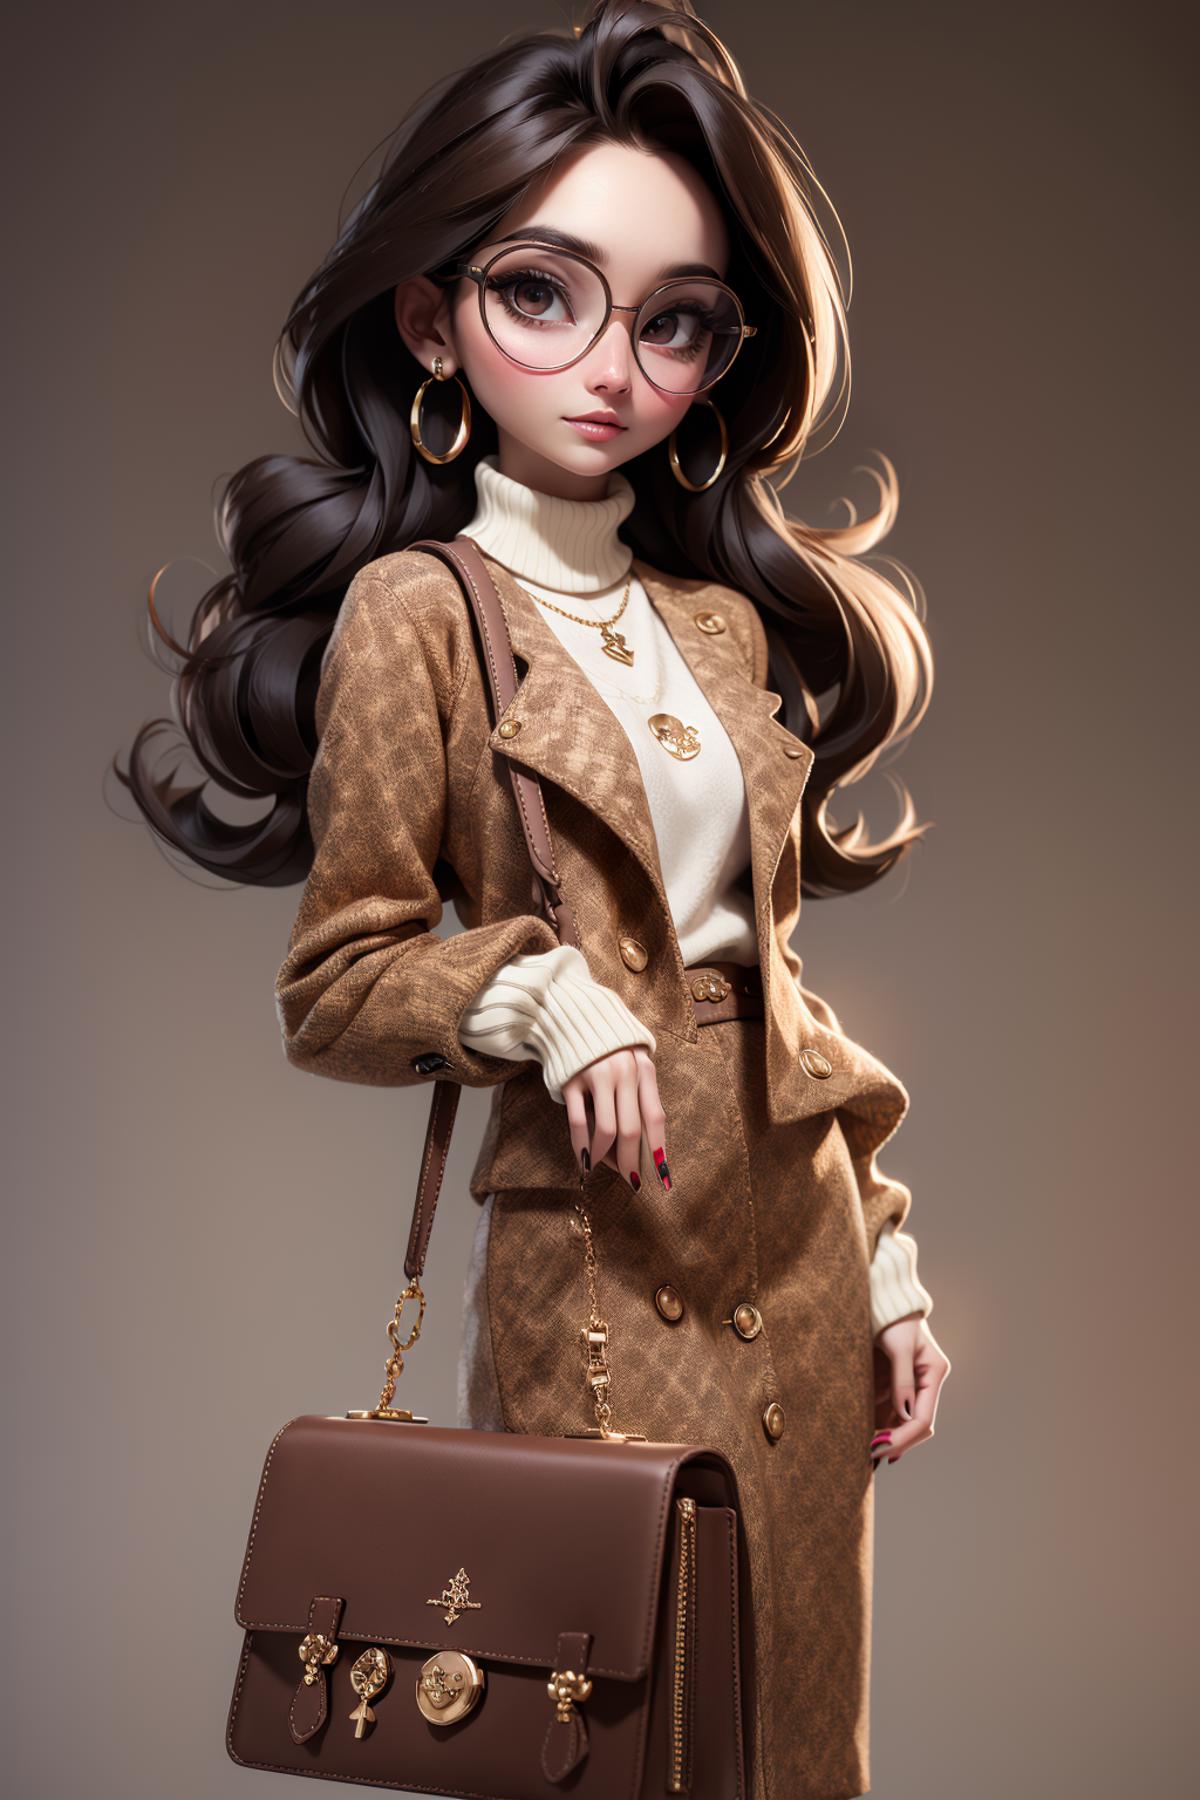 An Artistic Illustration of a Woman in a Trench Coat and Glasses.